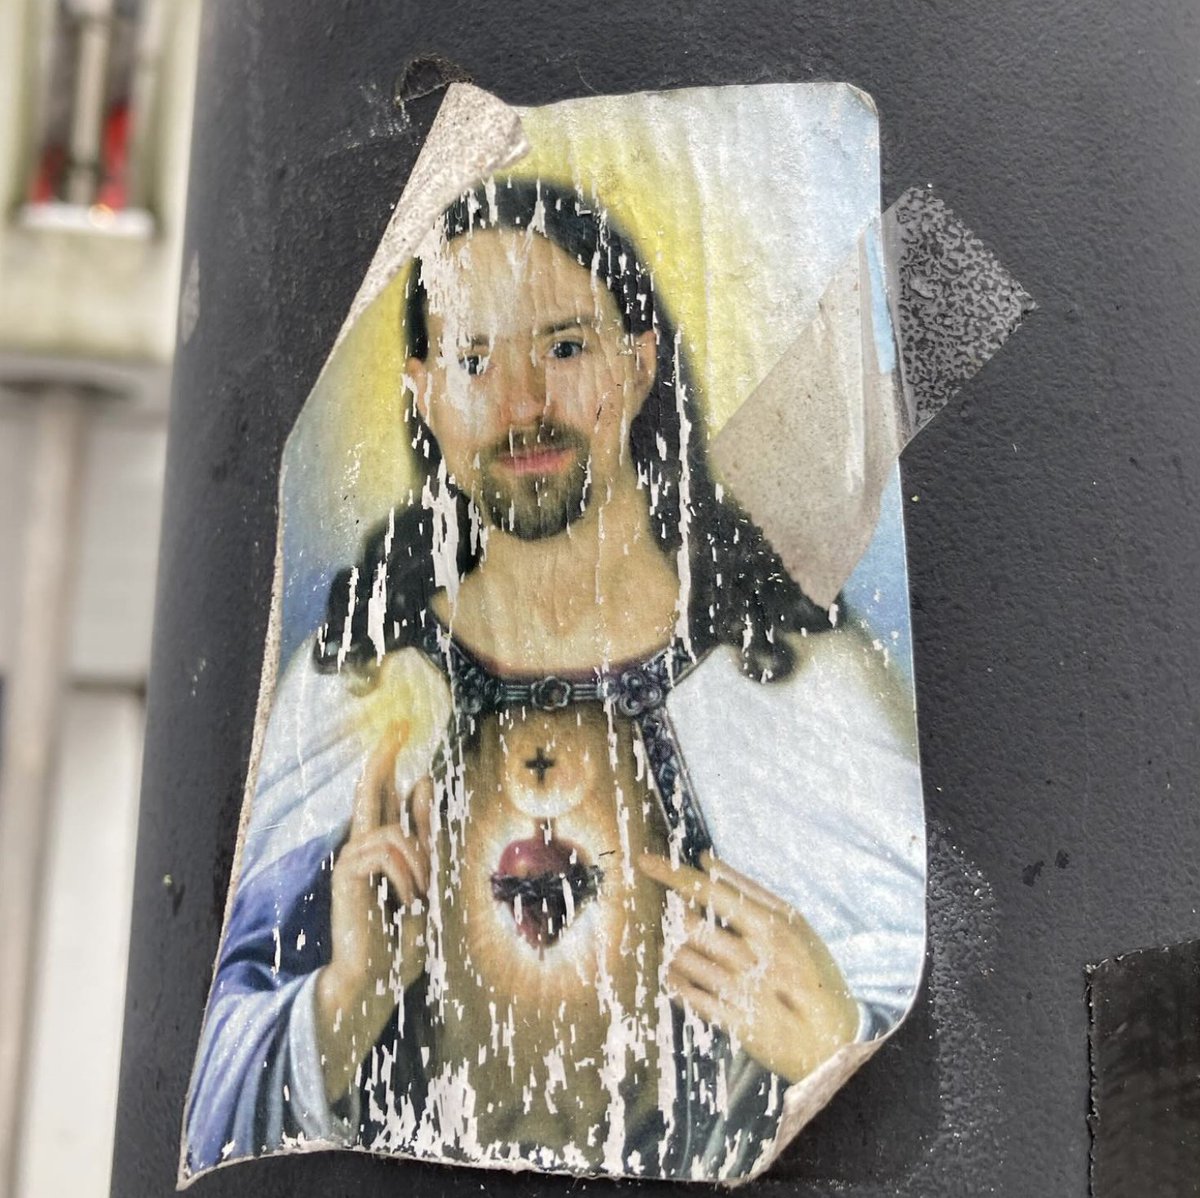 Colleague: 'Is there an old sticker of you as Jesus at that pole near the dining hall?' Me: 'Really? Some of my logic students made such a picture a while ago.' Colleague: 'Here, look.' Me: 'That's the one. Wow. Never seen it here. So crazy! Gotta love them students, though.'